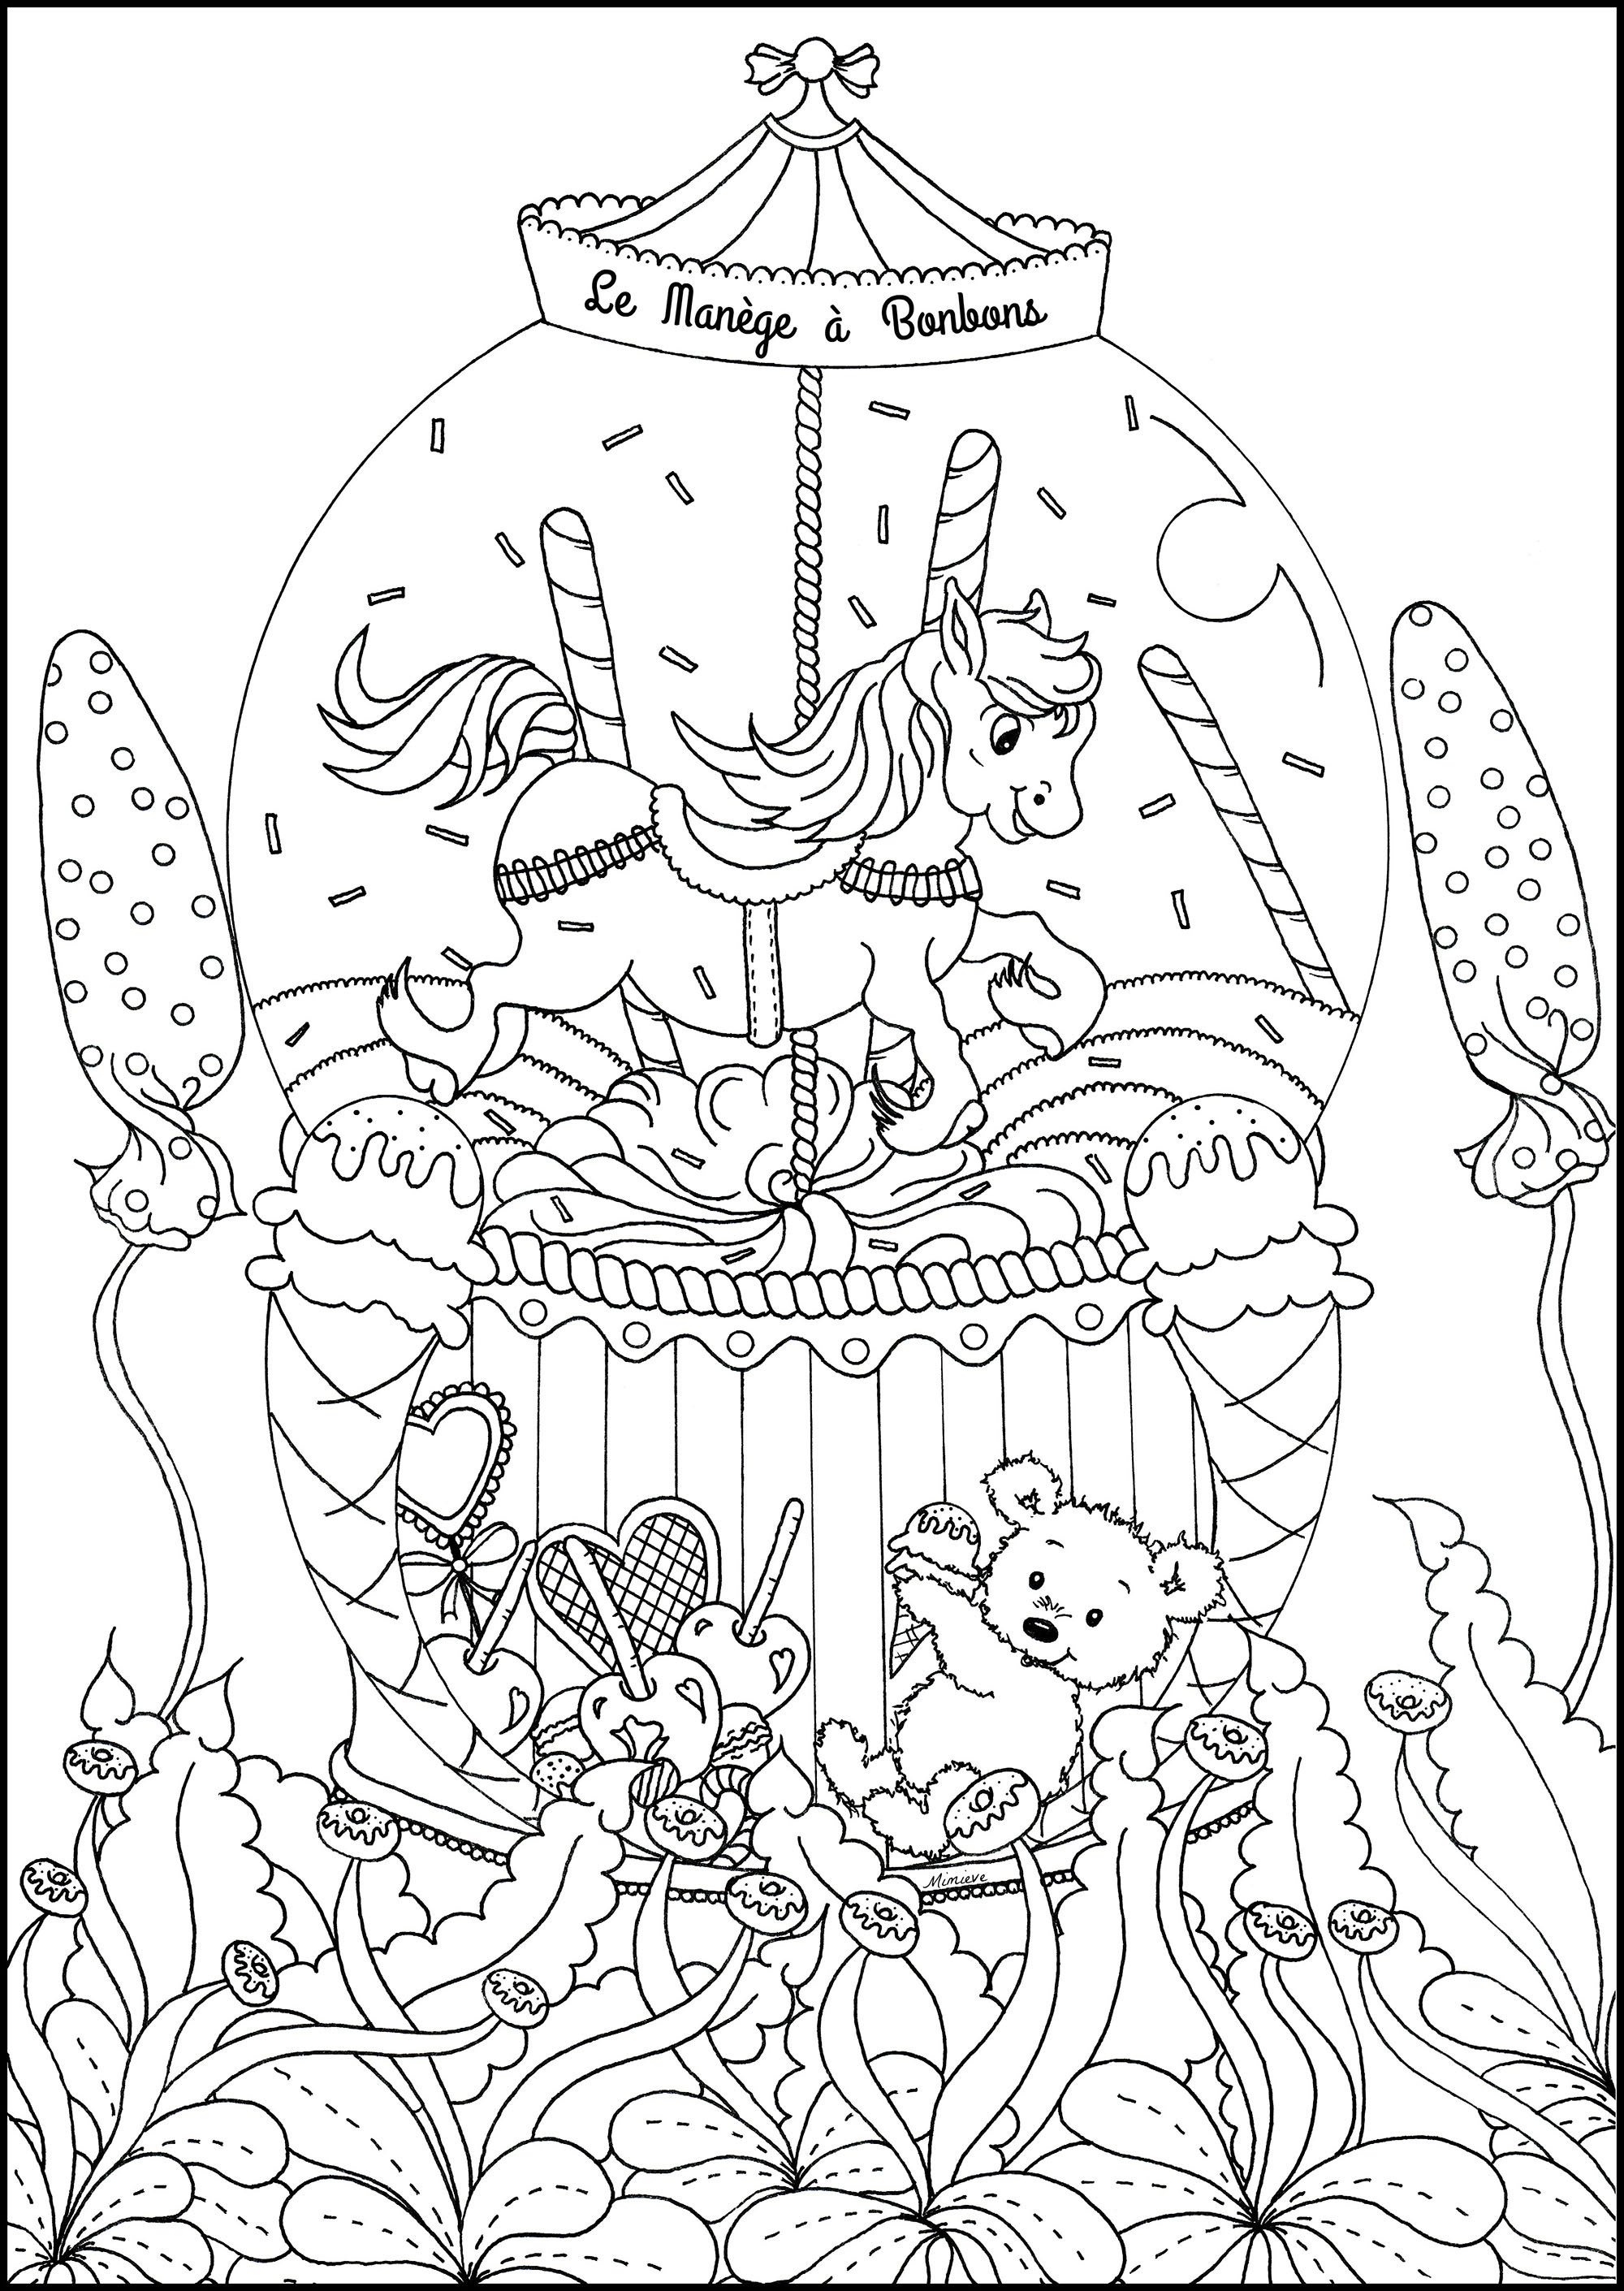 Candy Coloring Pages For Adults - We are entering into the few weeks ...